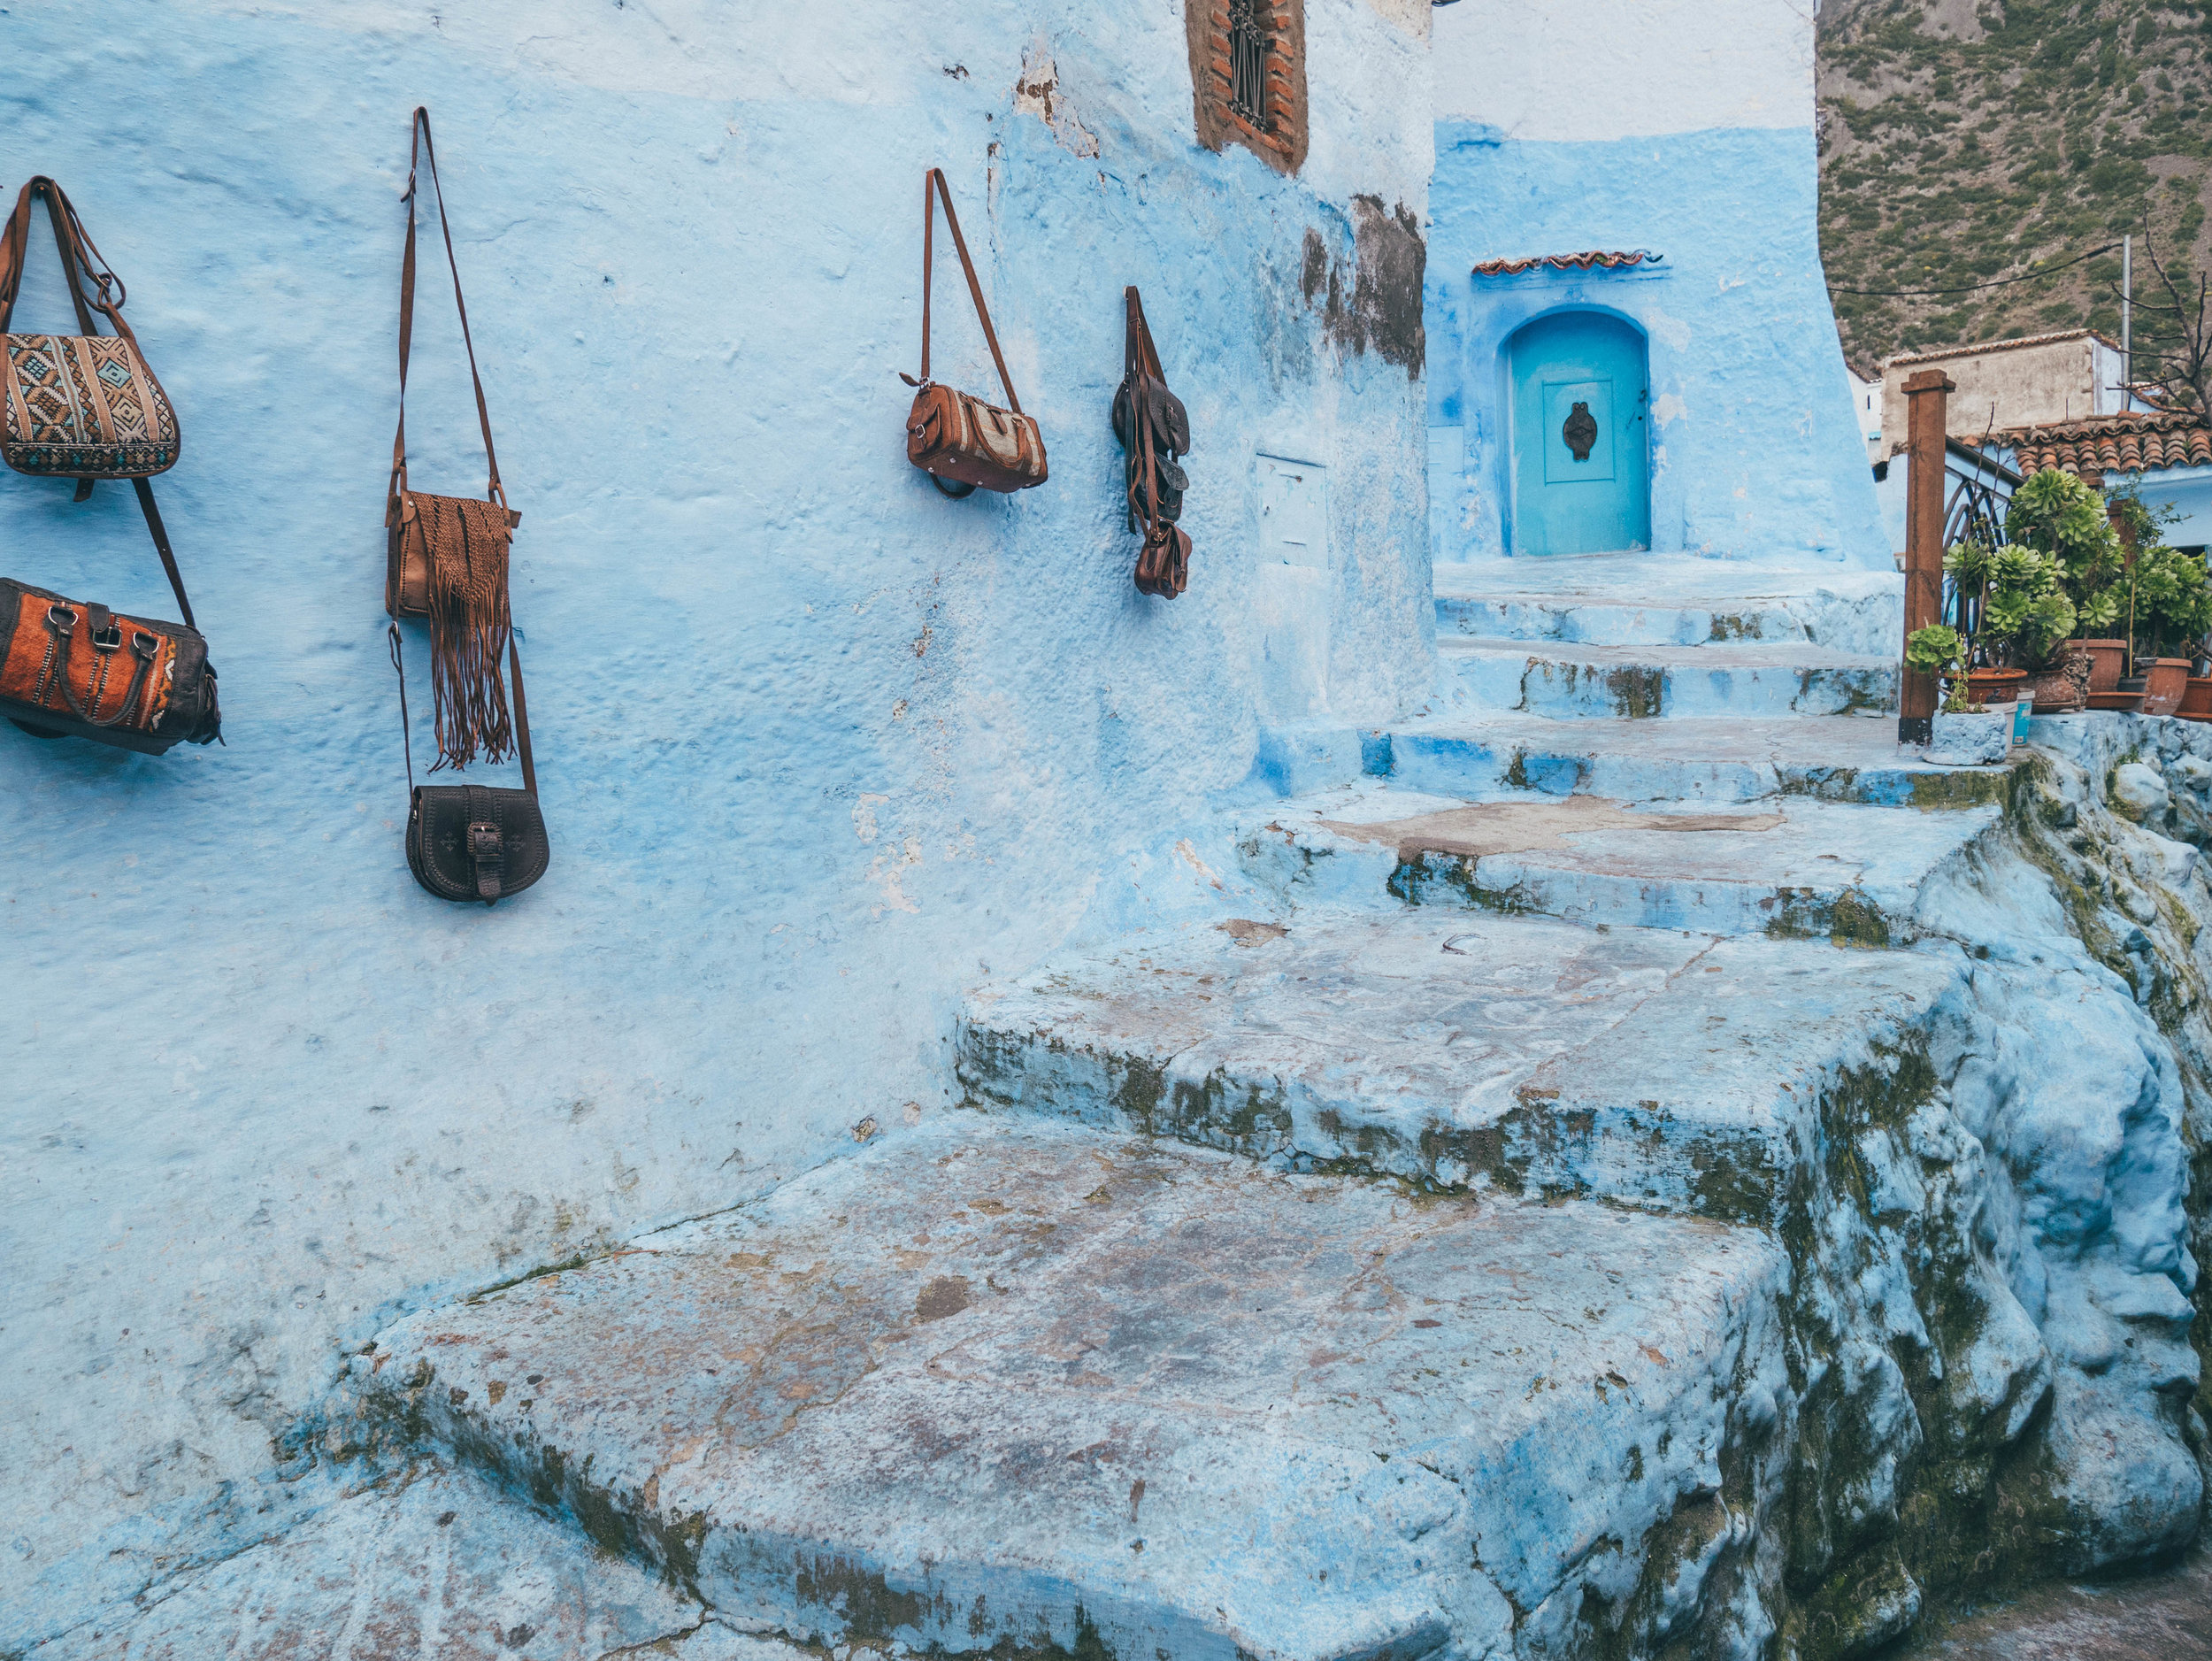 Selling bags - Chefchaouen - Morocco